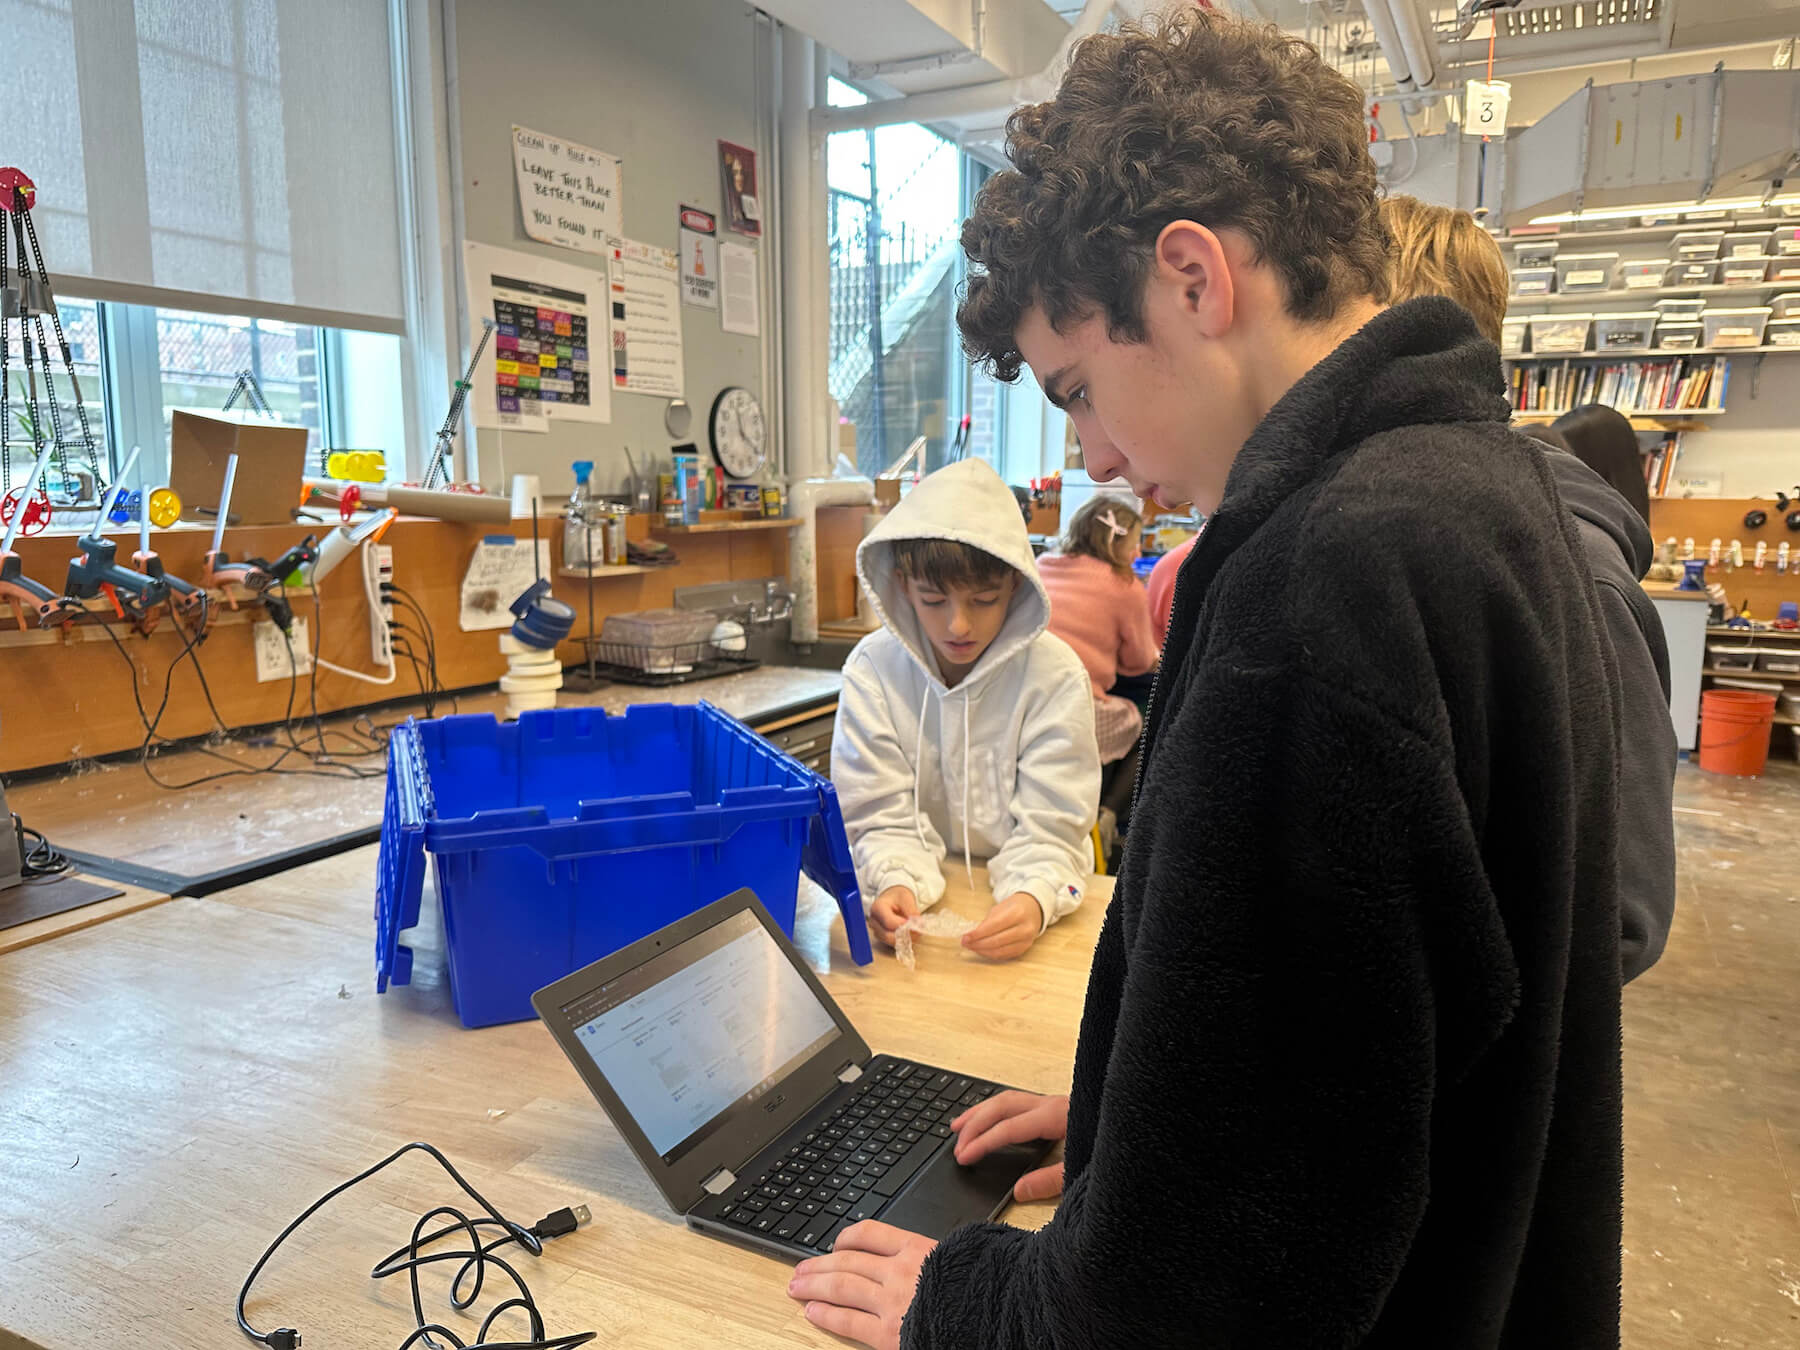 Three Ethical Culture Fieldston School students work on a project.